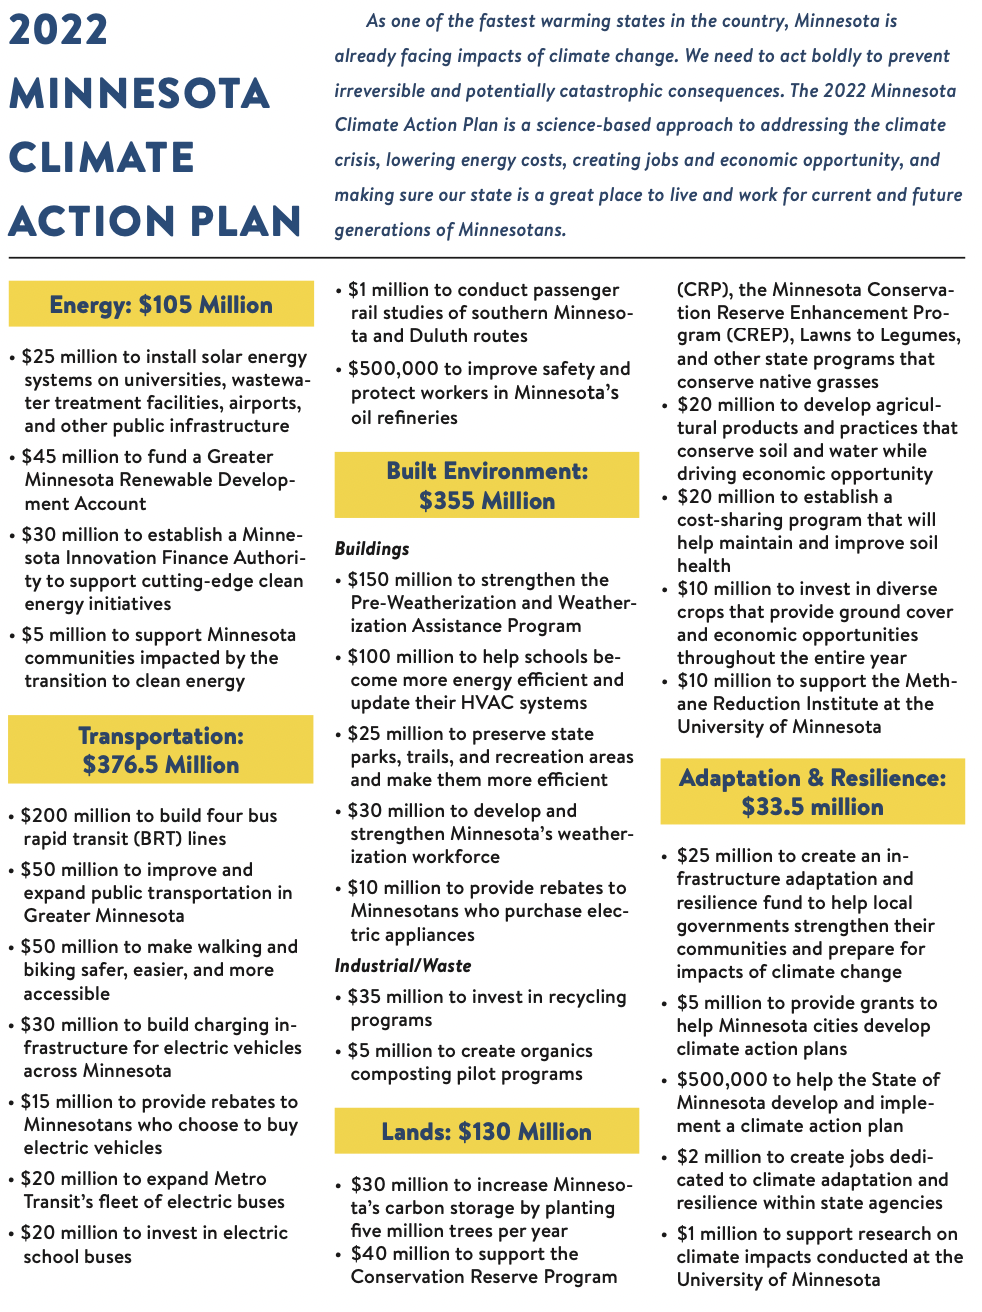 2022 Climate Action Plan